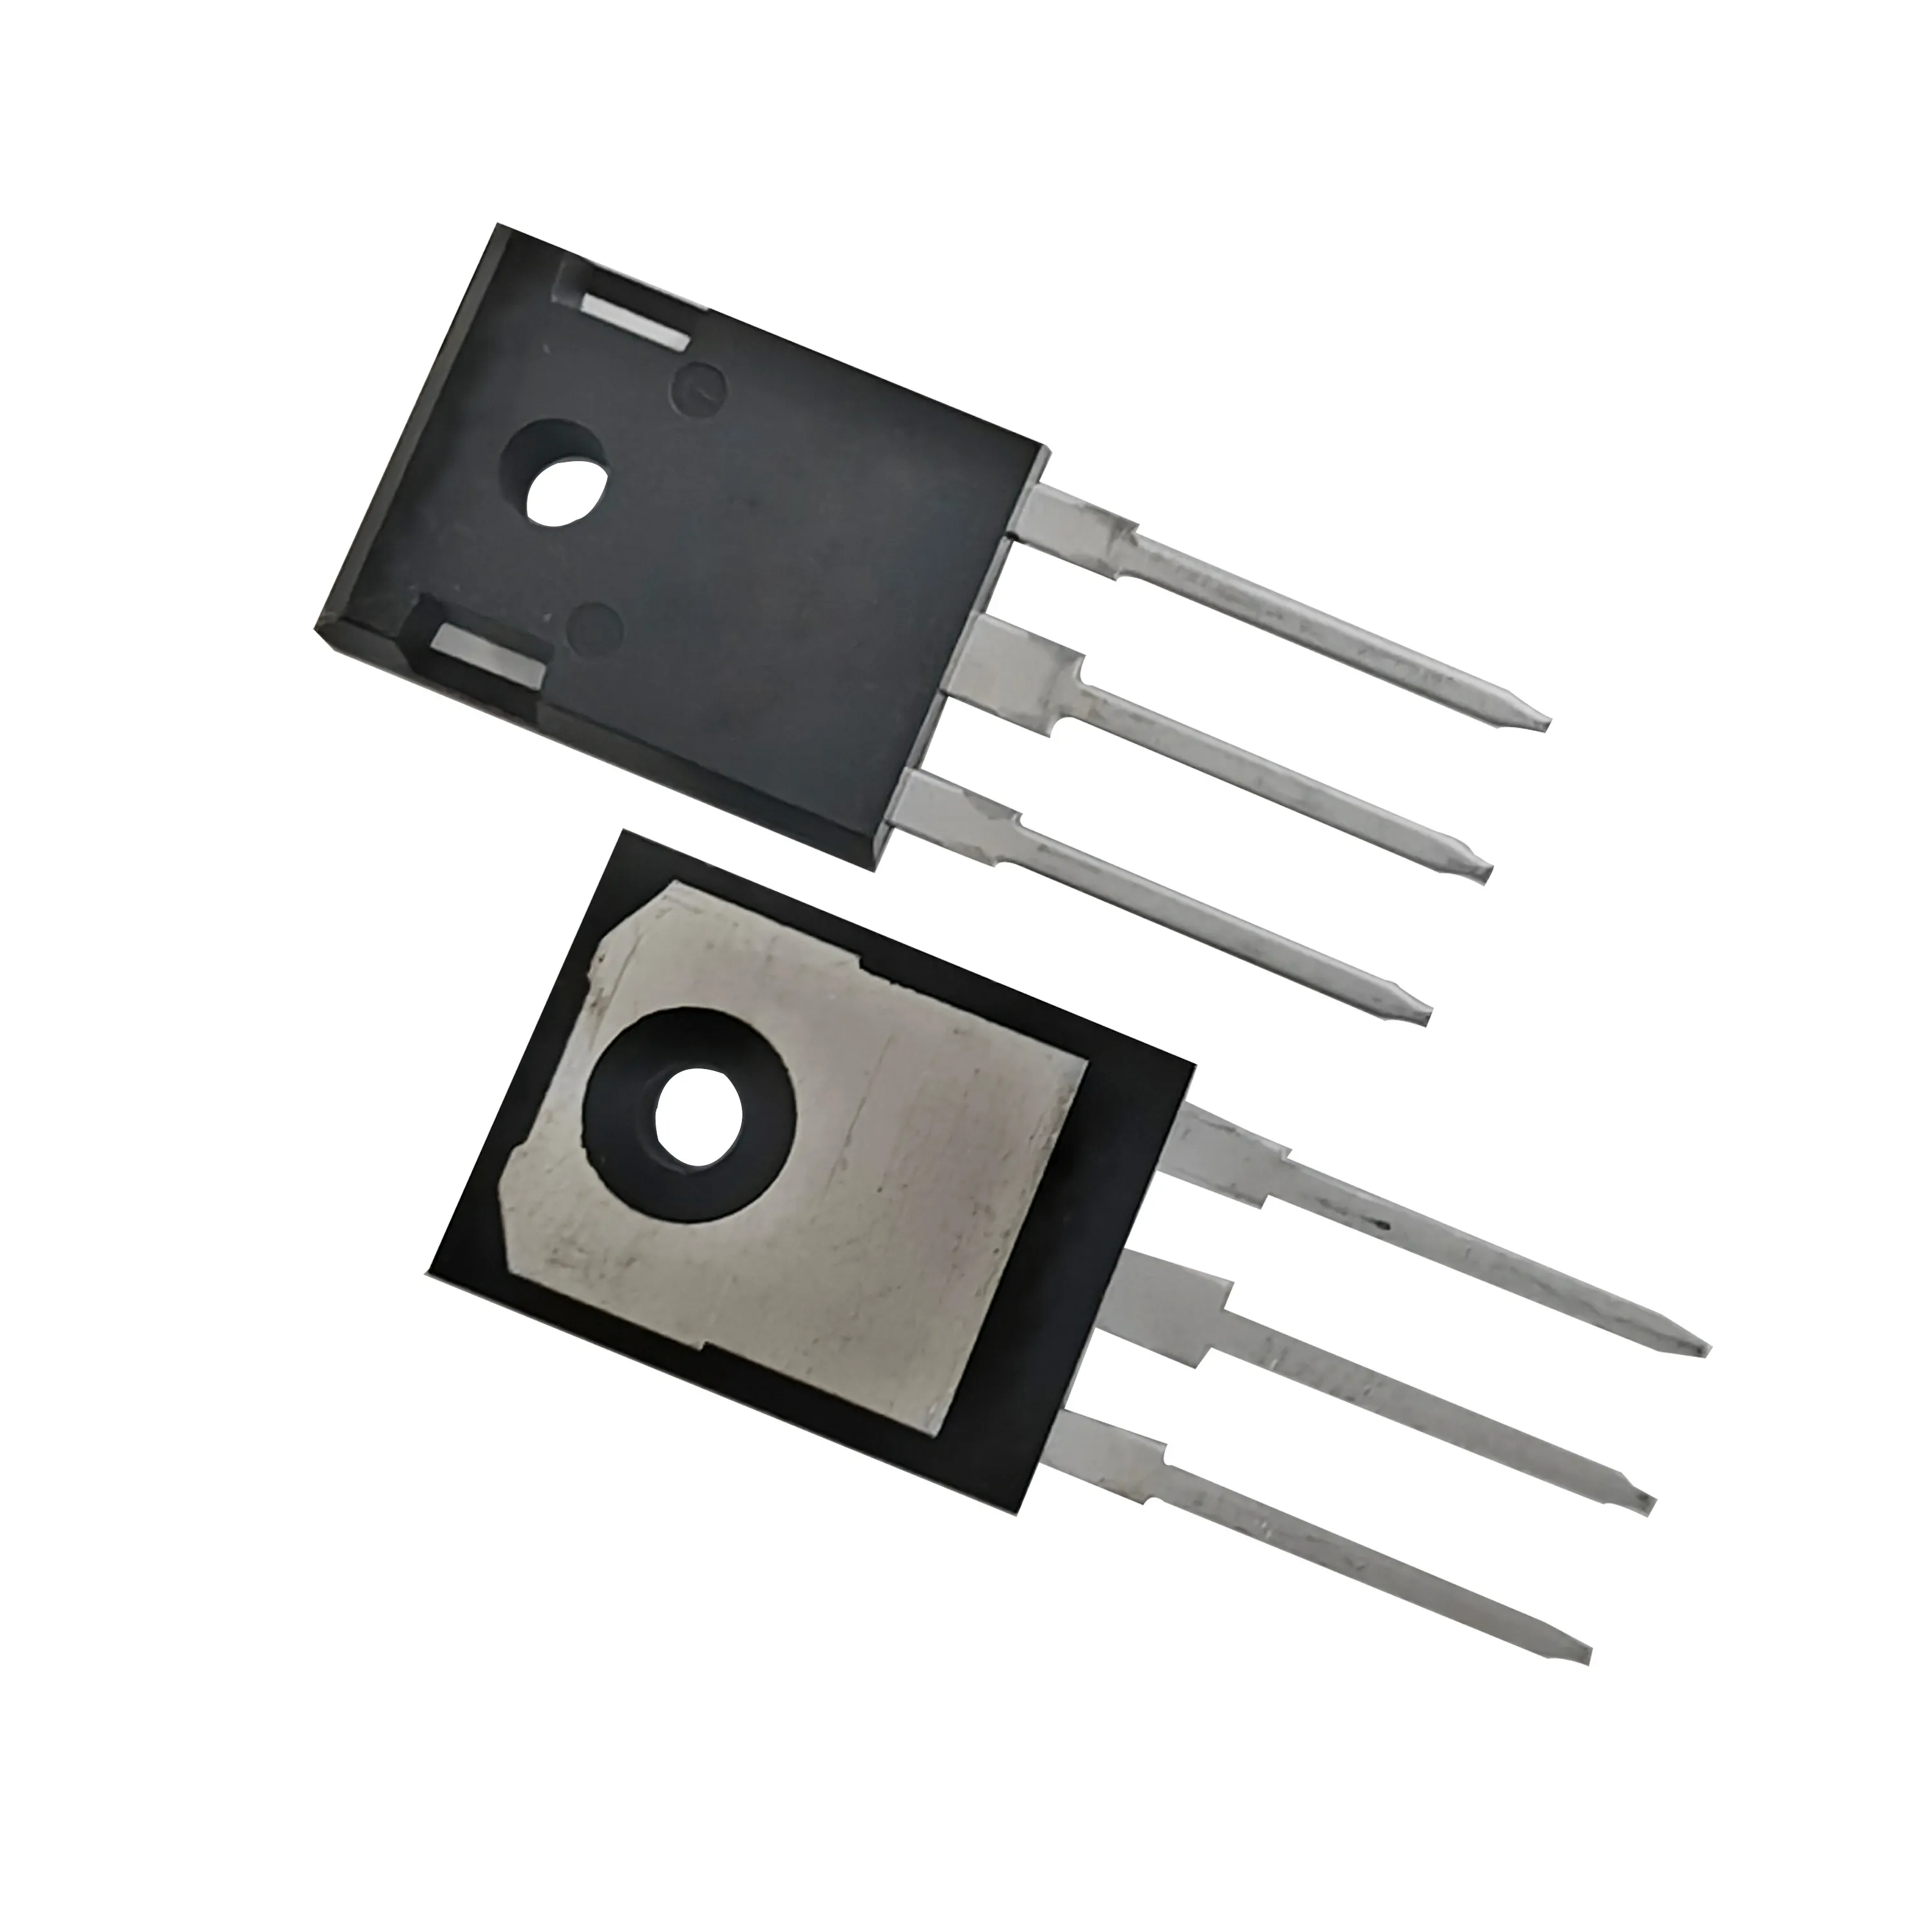 1200V 33A SiC puissance MOSFET 75 Milli Ohm N-canal MOSFET Transistor TO-247 paquet pour onduleurs solaires